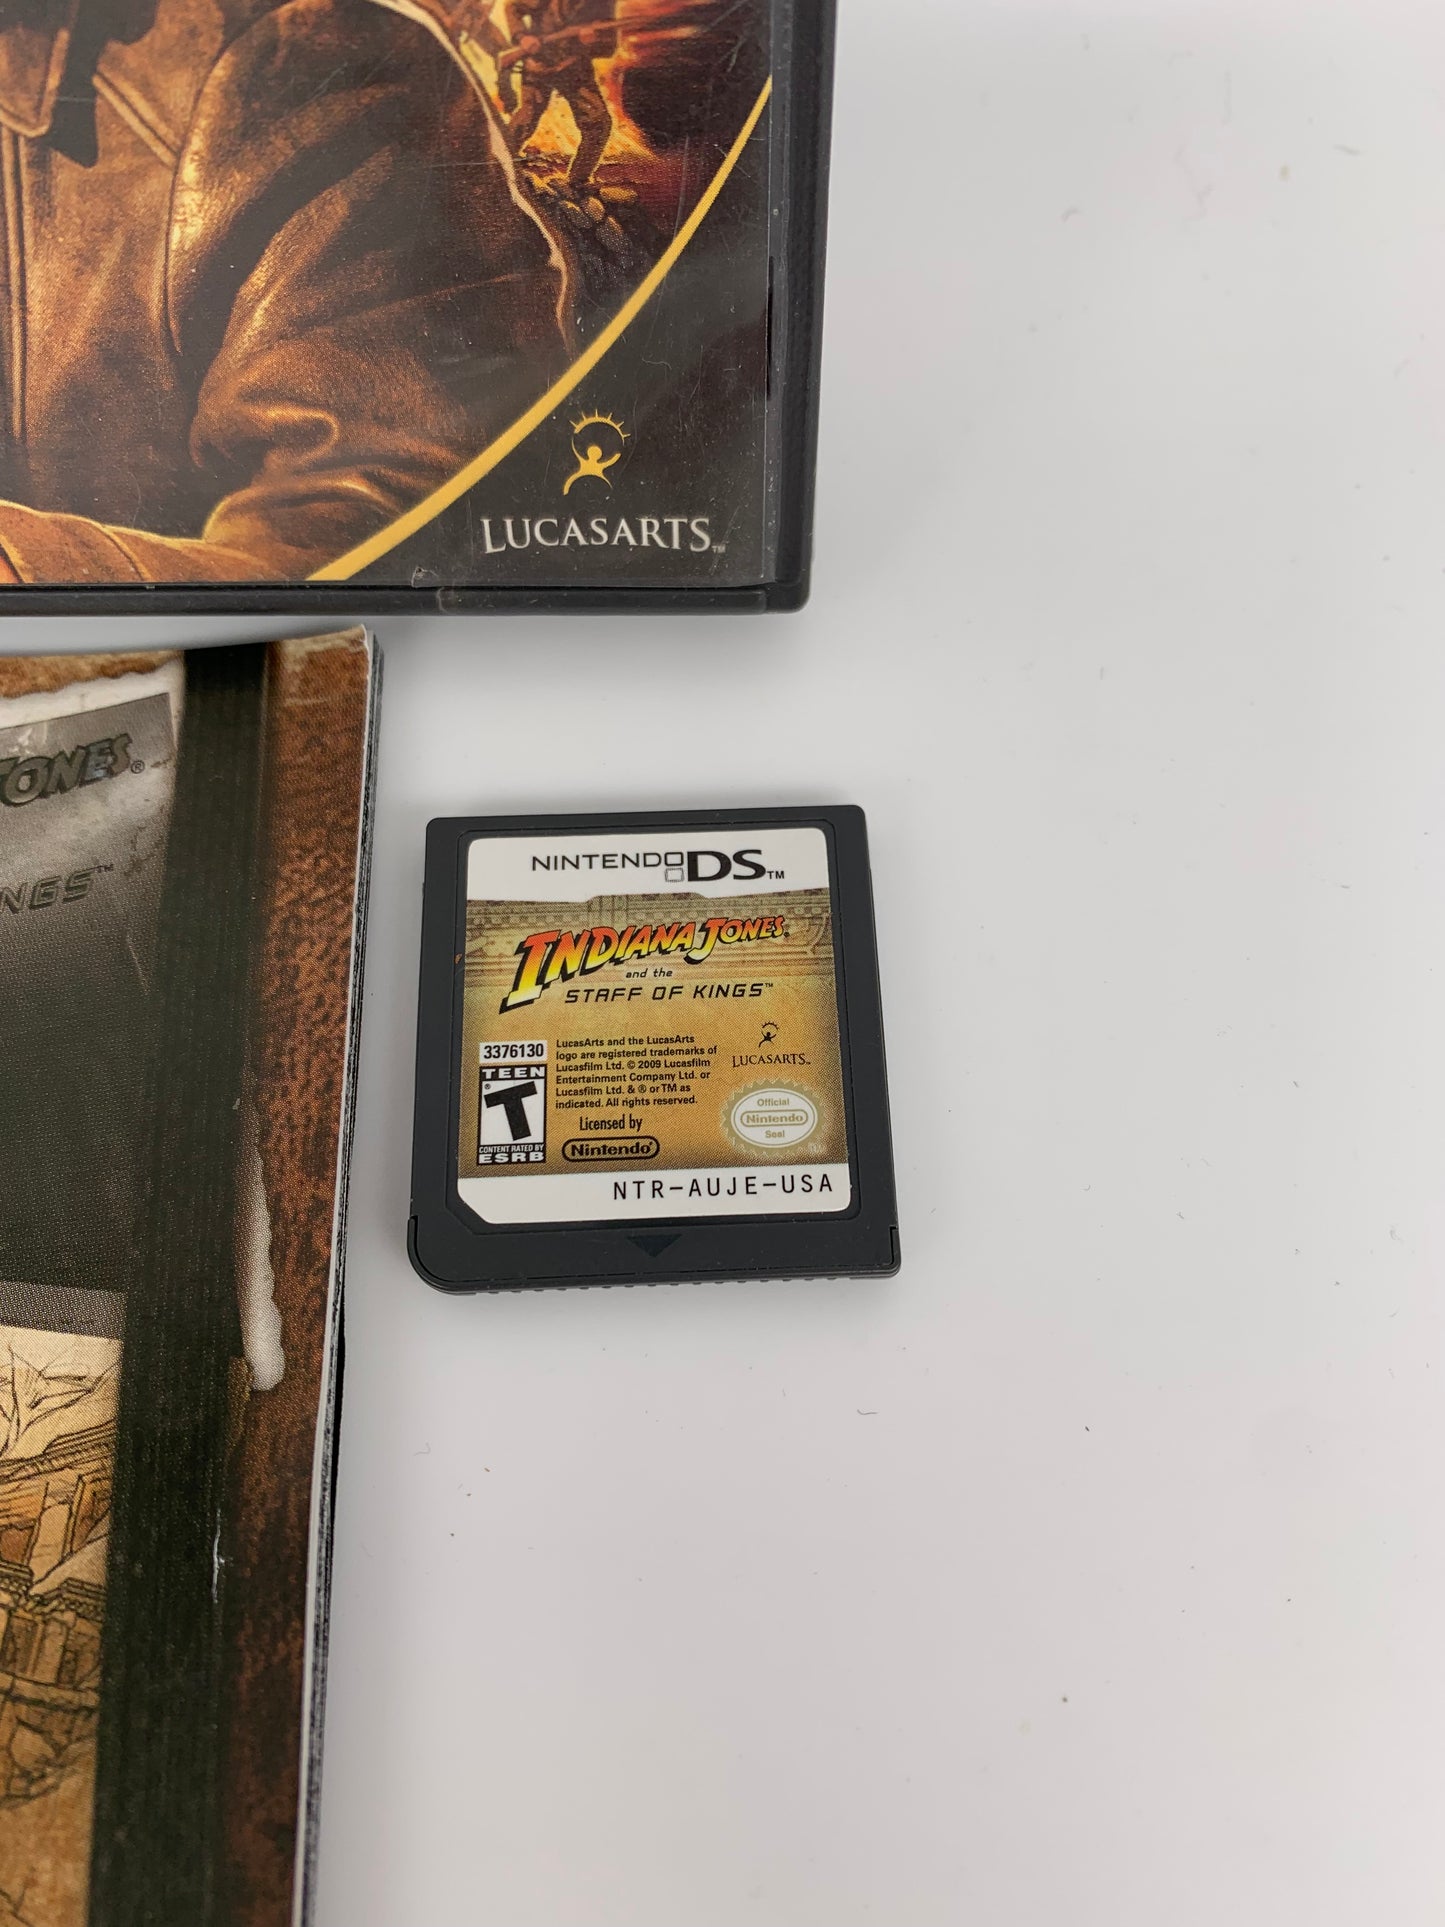 NiNTENDO DS | iNDiANA JONES AND THE STAFF OF KiNGS